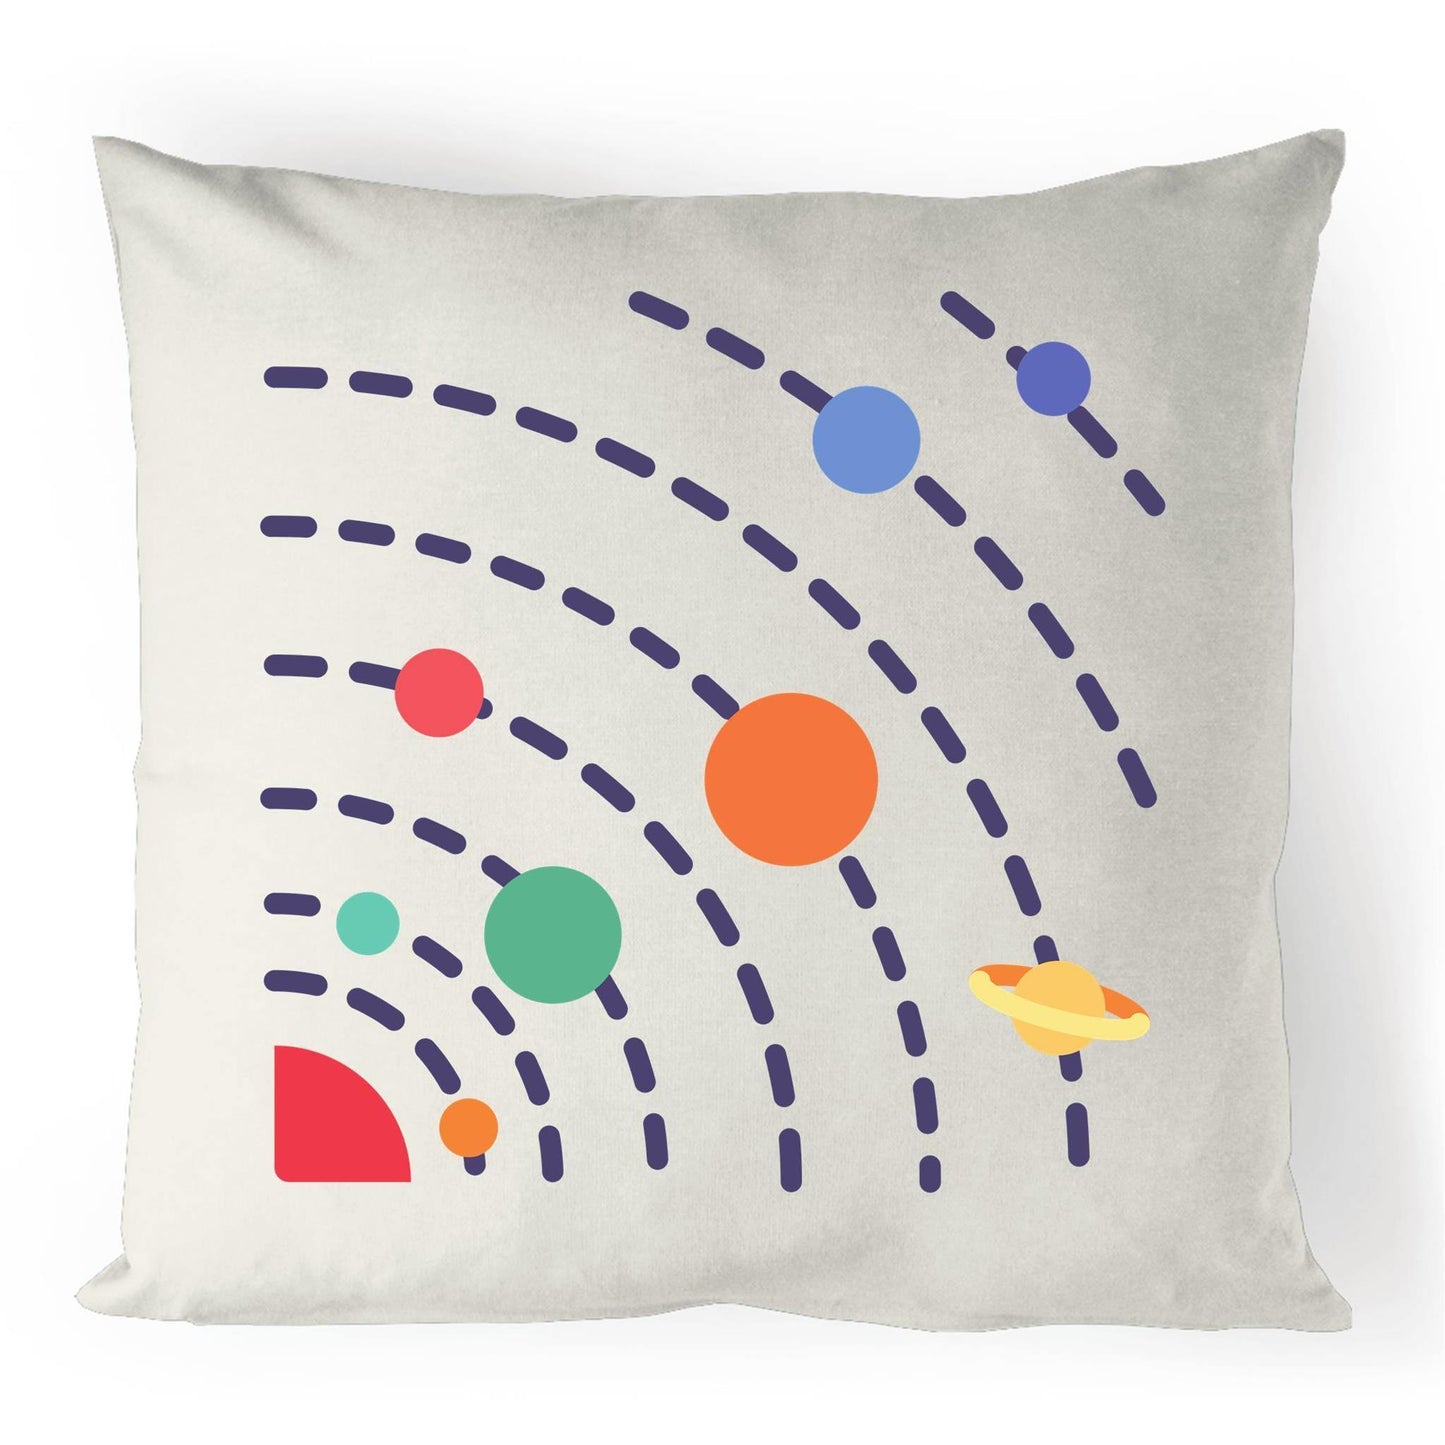 Solar System - 100% Linen Cushion Cover Natural One-Size Linen Cushion Cover kids Science Space